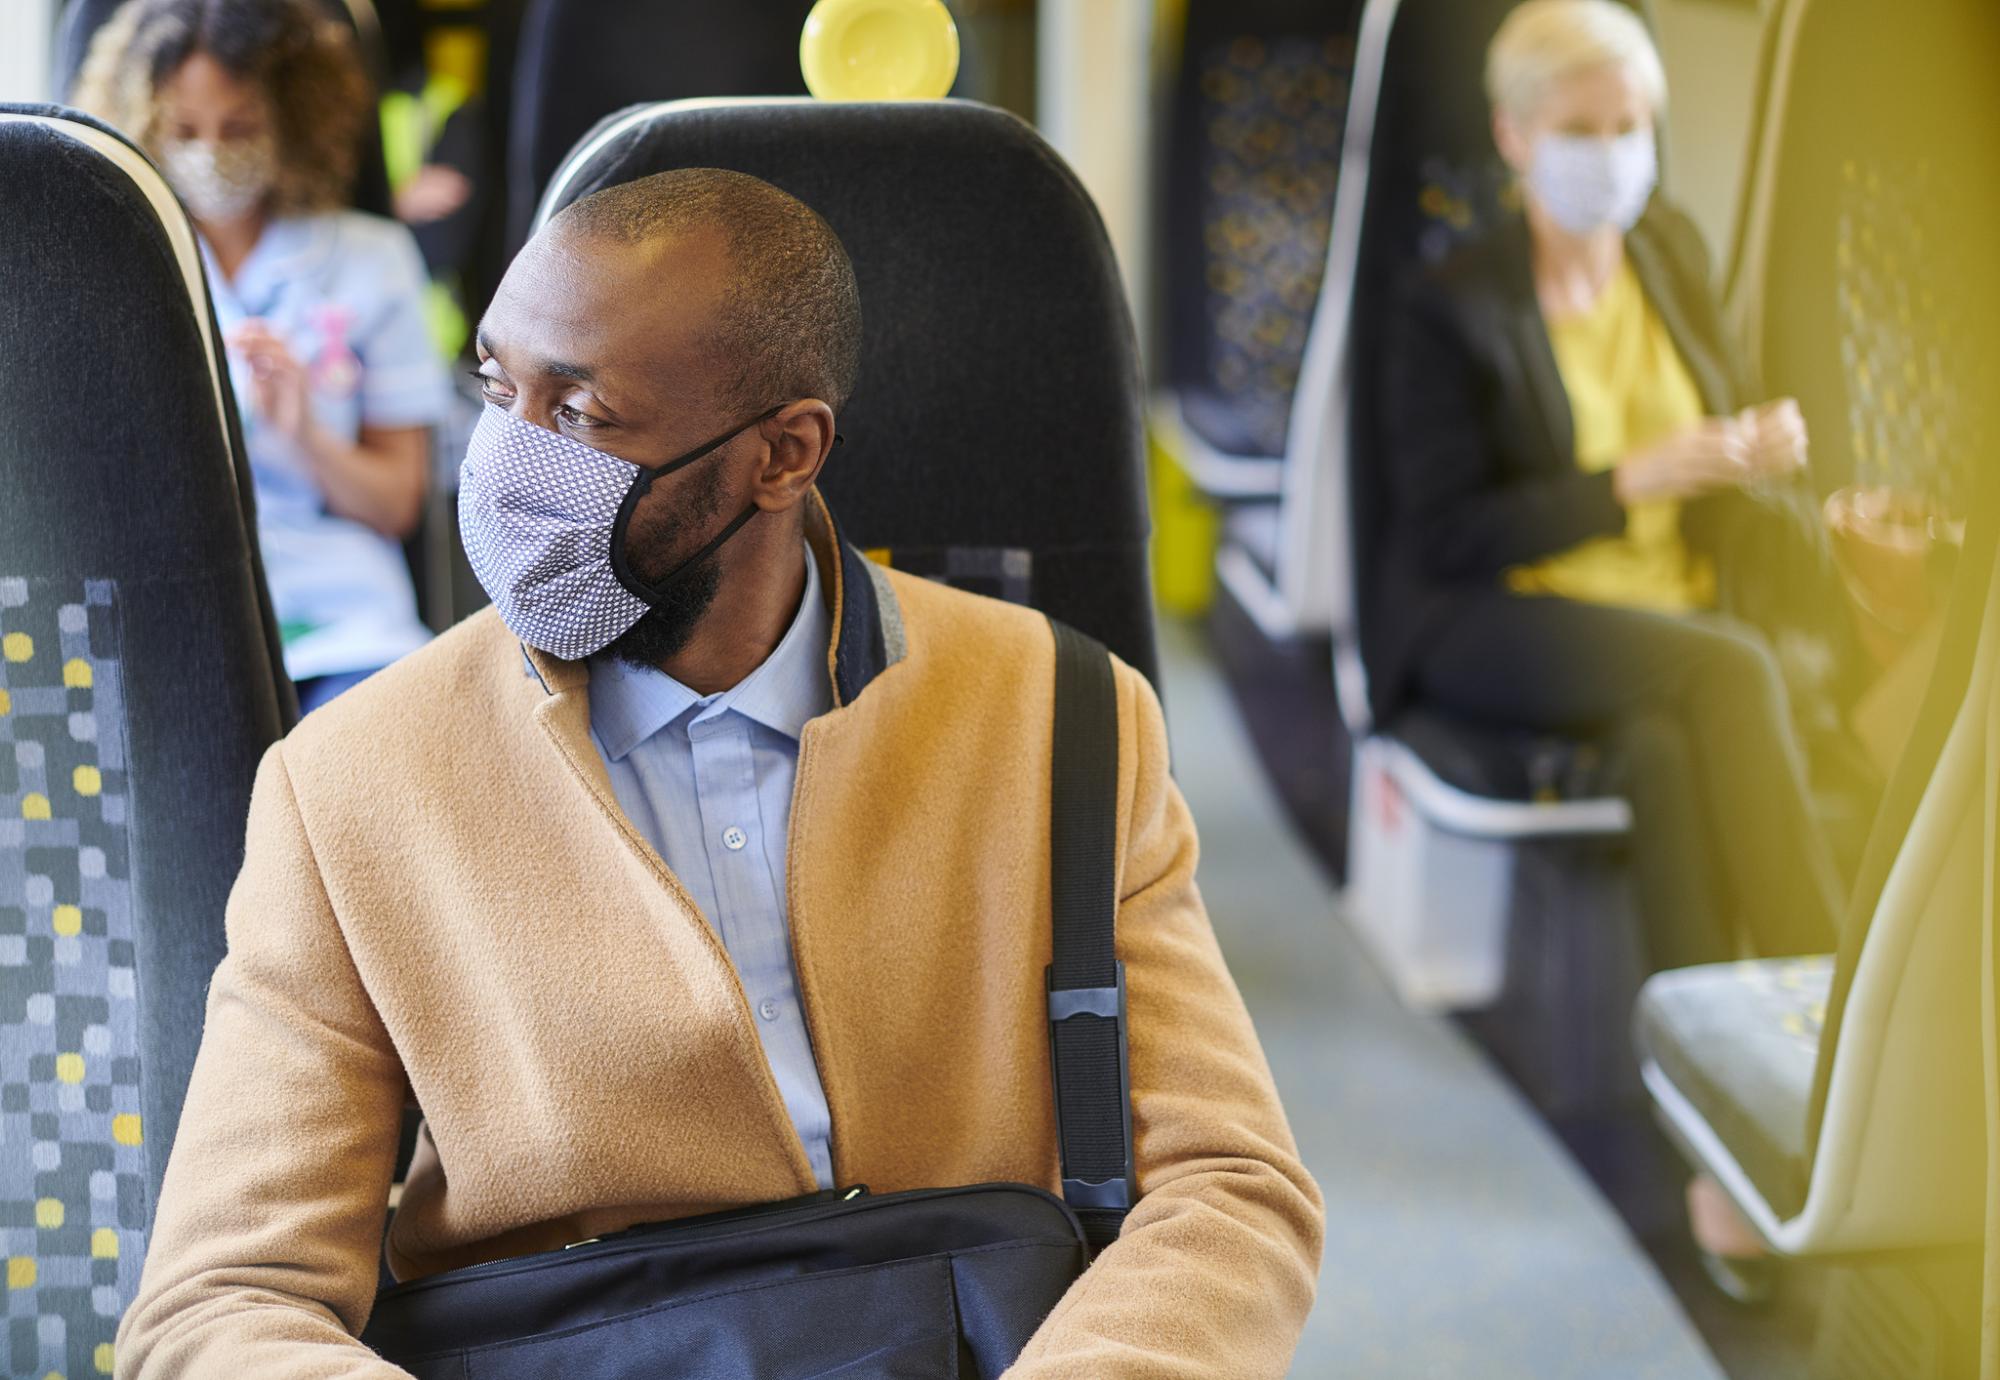 Train passenger sat in a seat wearing a face mask